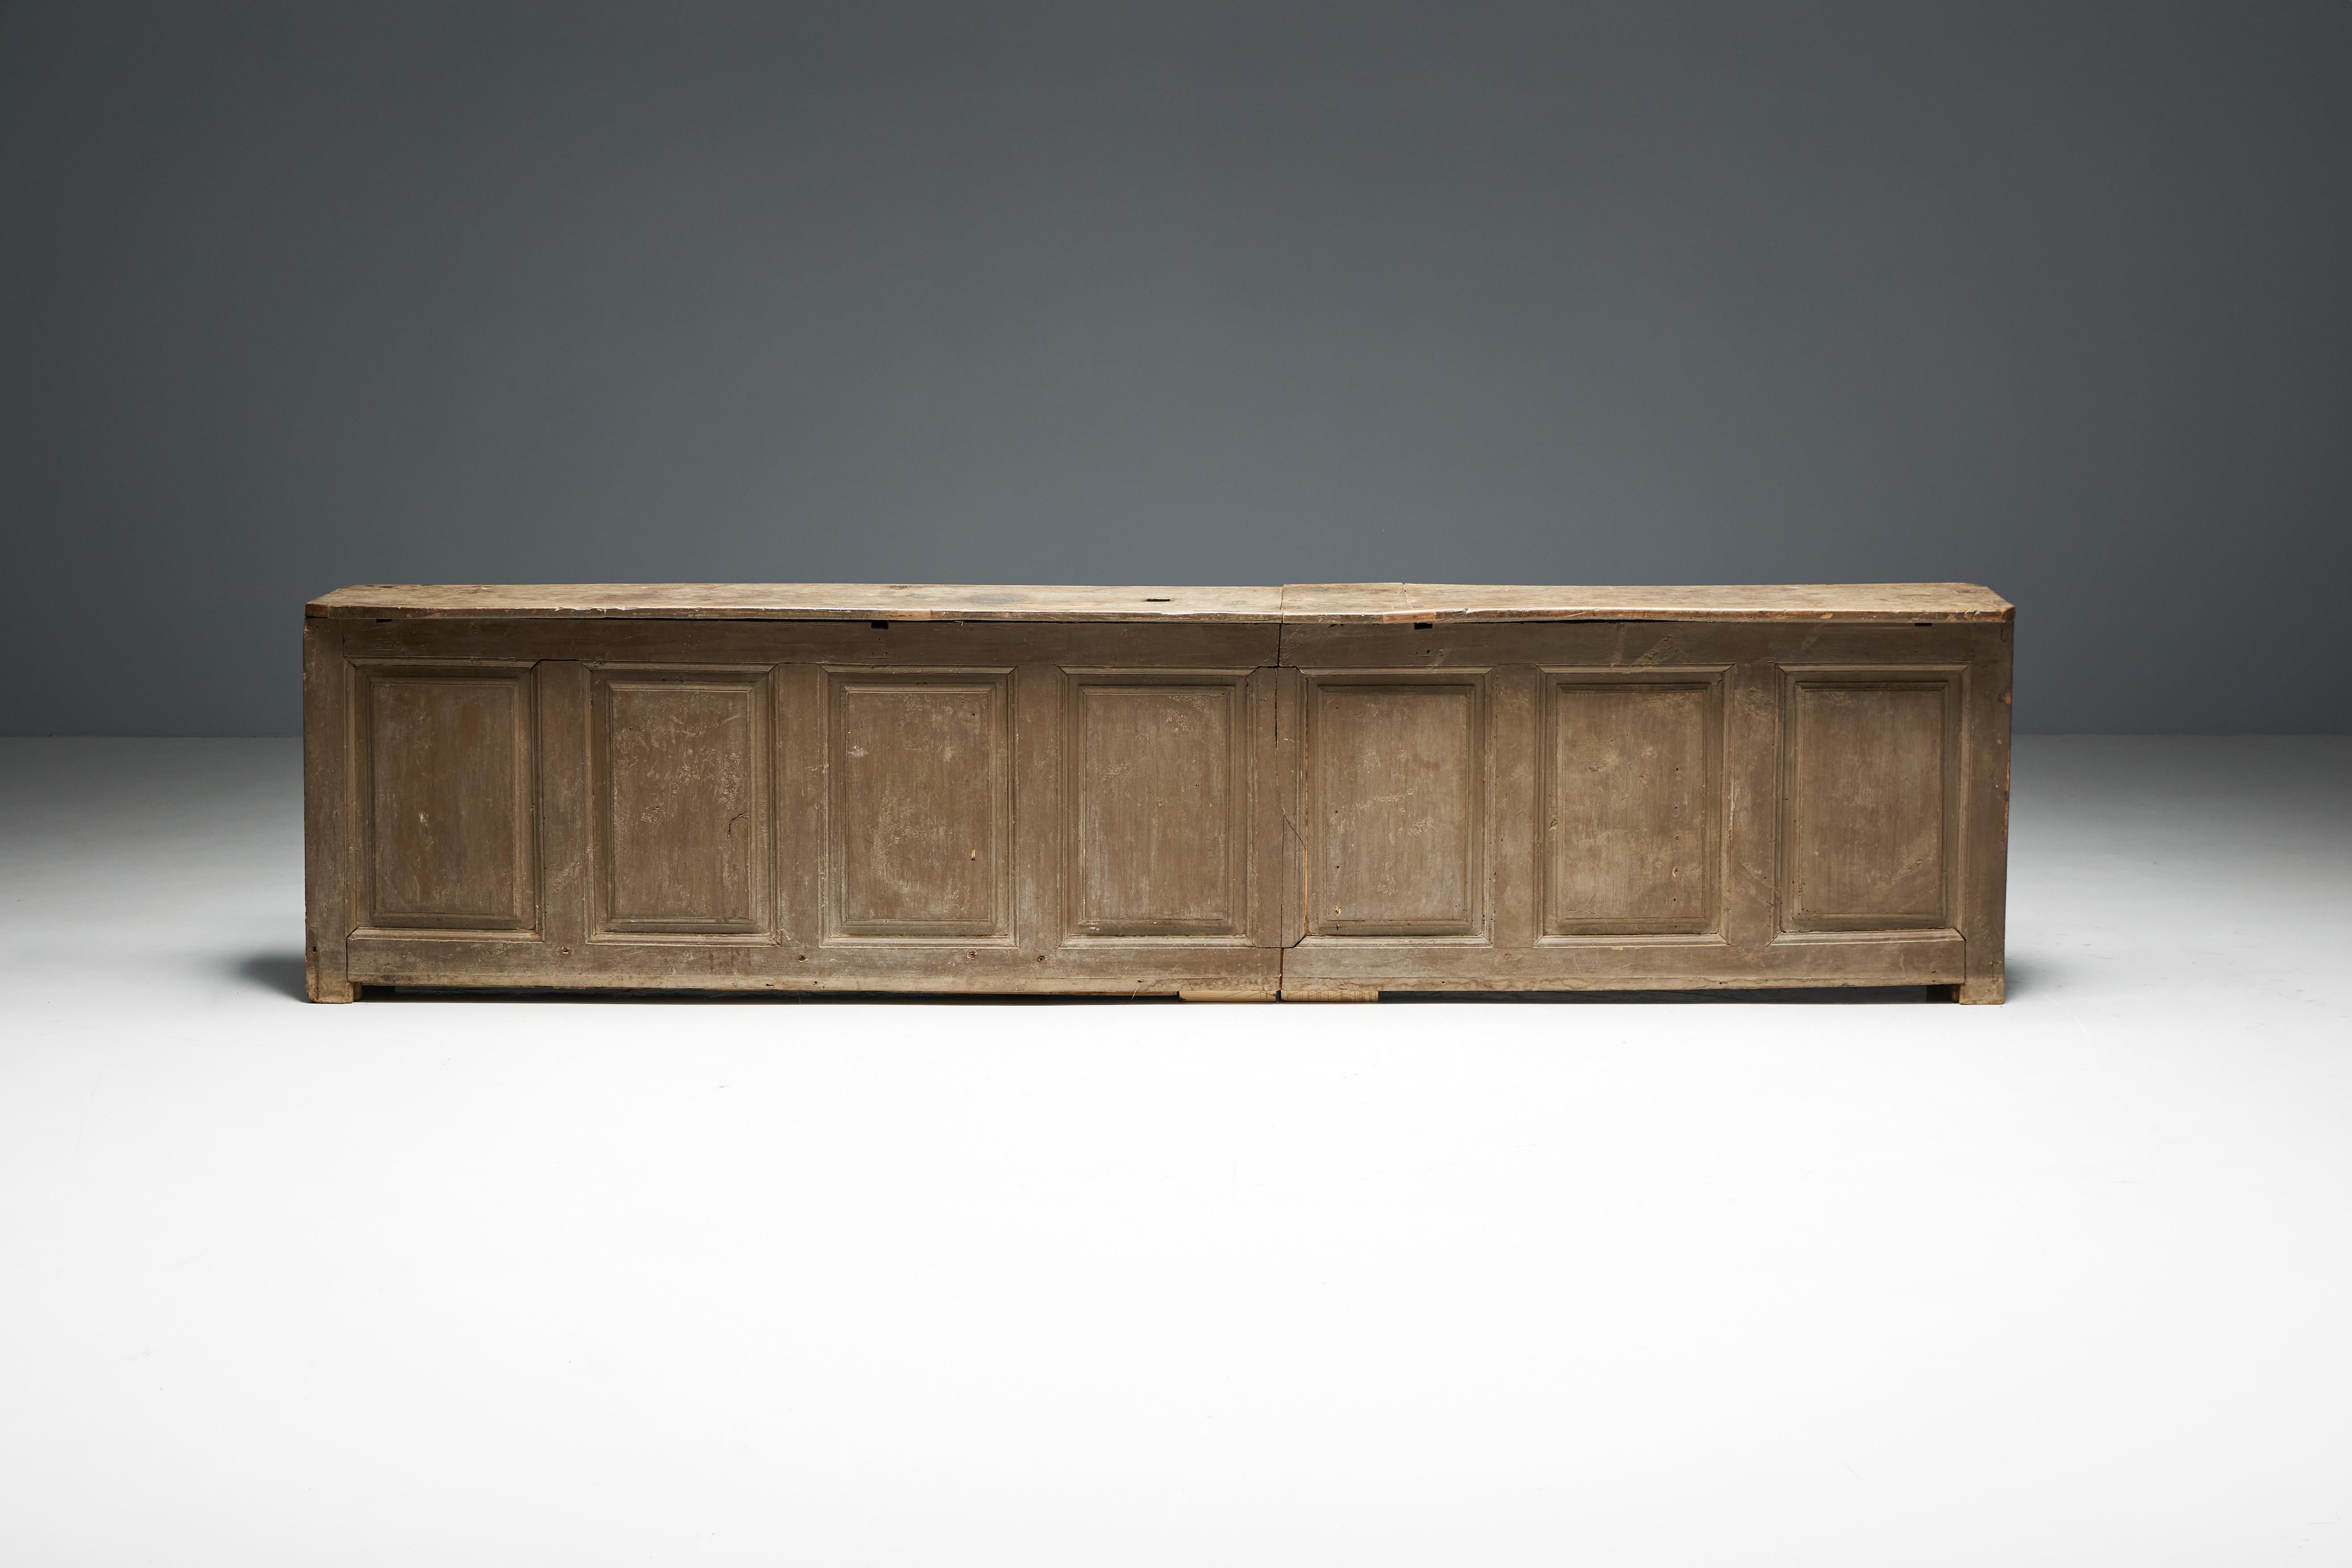 Rustic Art Populaire Freestanding Bar Counter, France, 19th Century For Sale 6